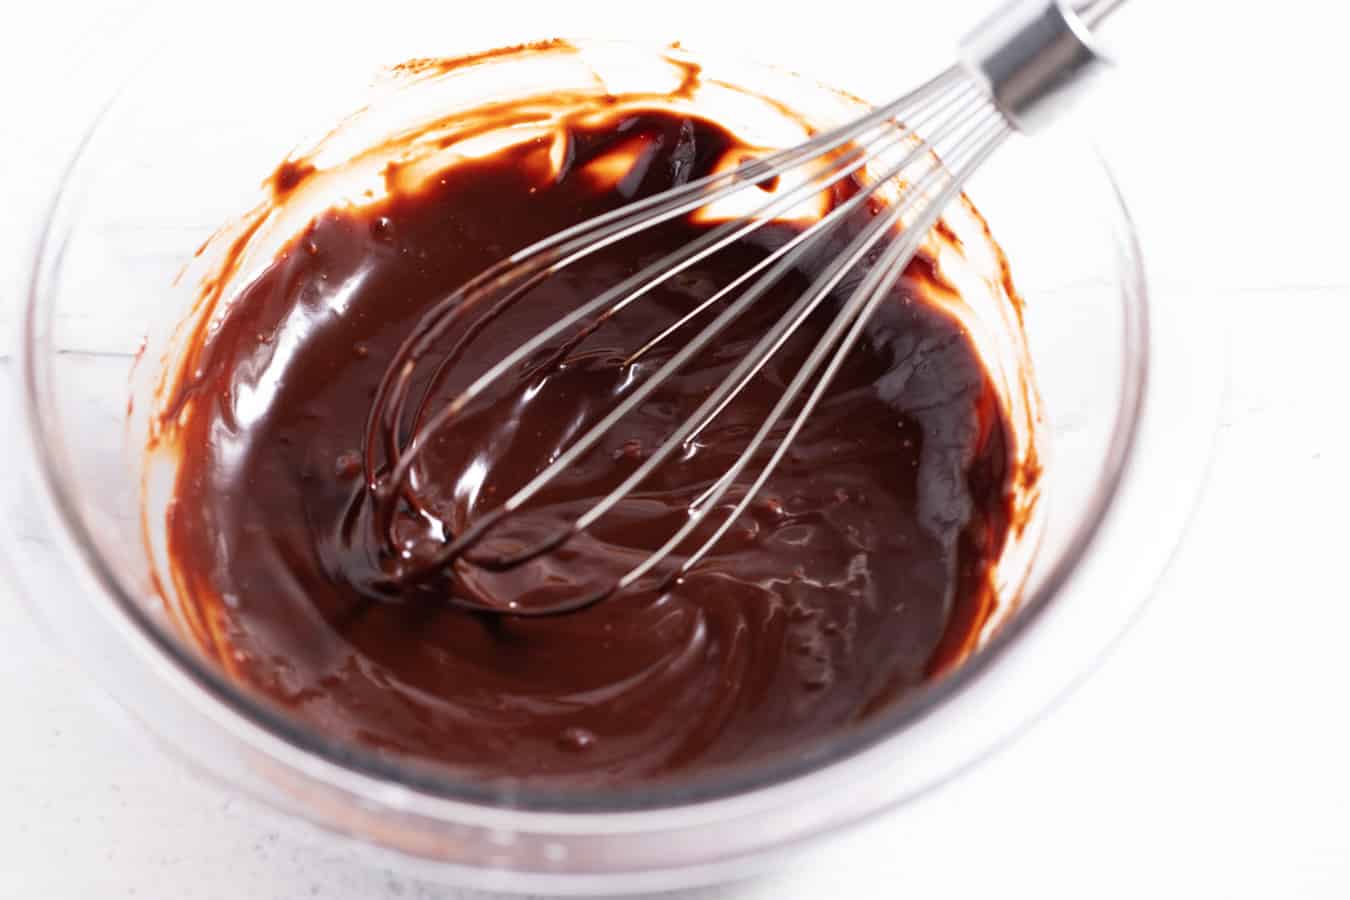 wire whisk mixing seized chocolate